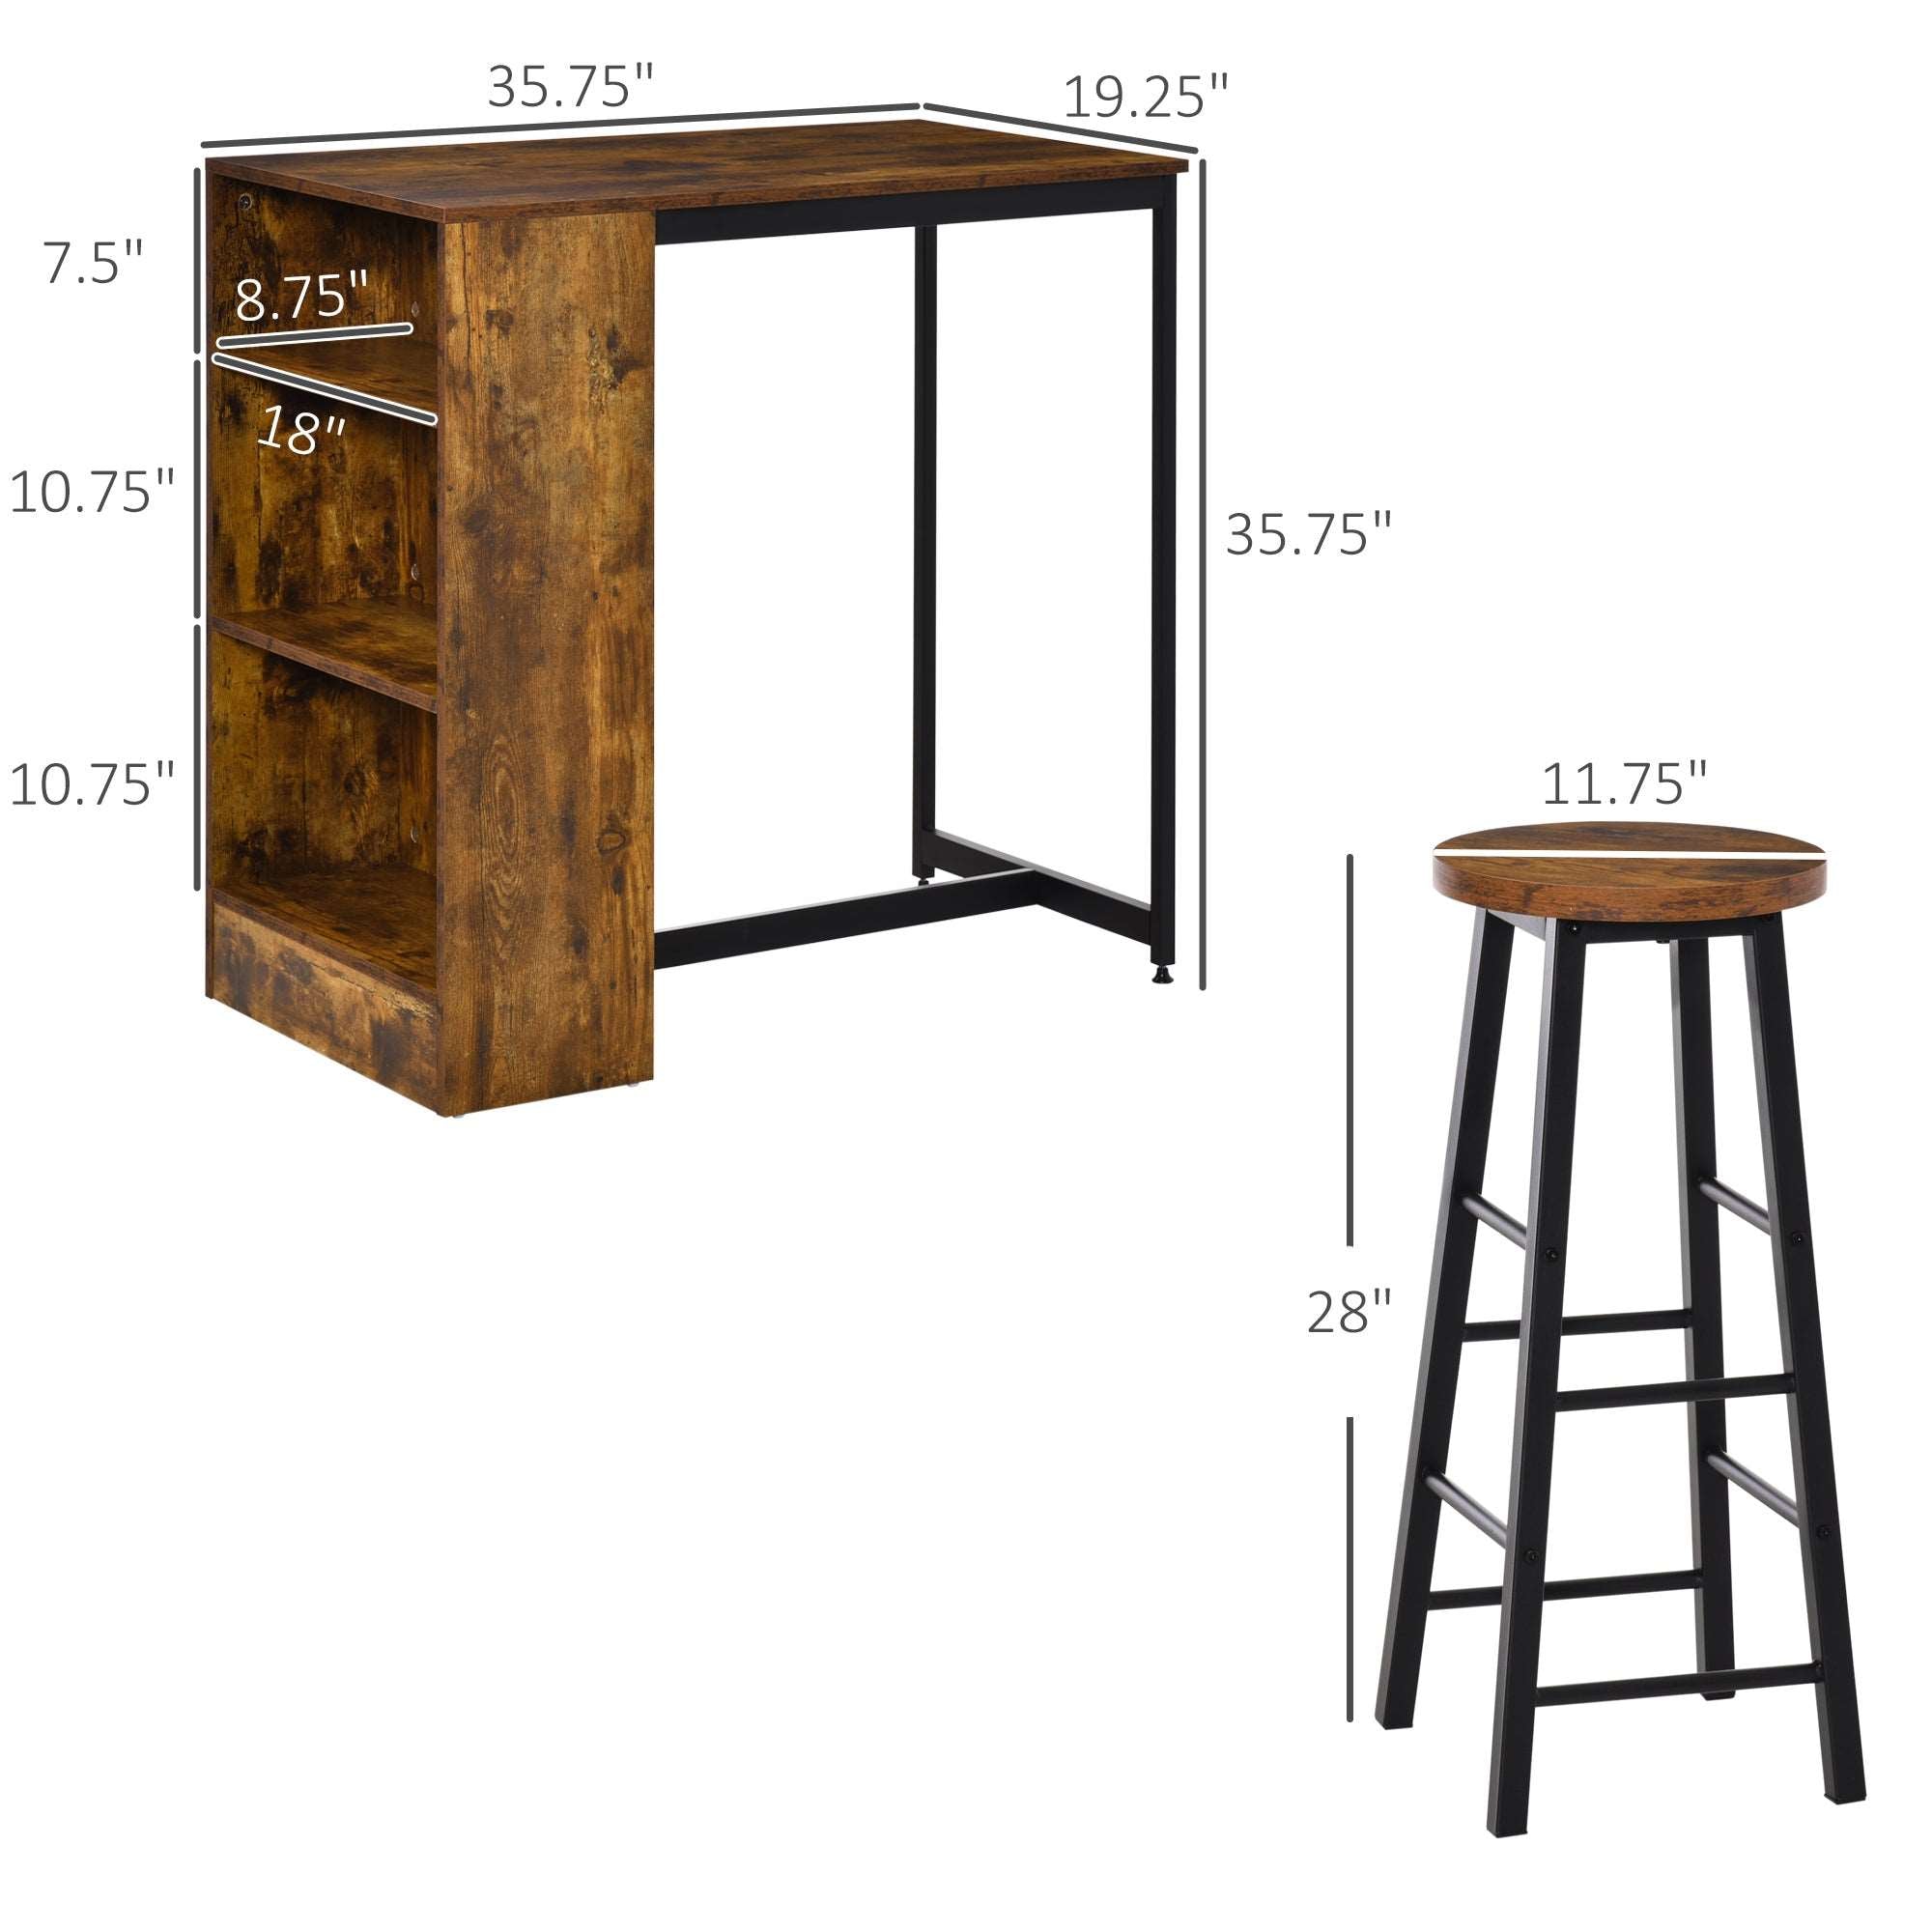 Bellemave® 3 Piece Industrial Dining Table Set, Counter Height Bar Table & Stools with Storage Shelf